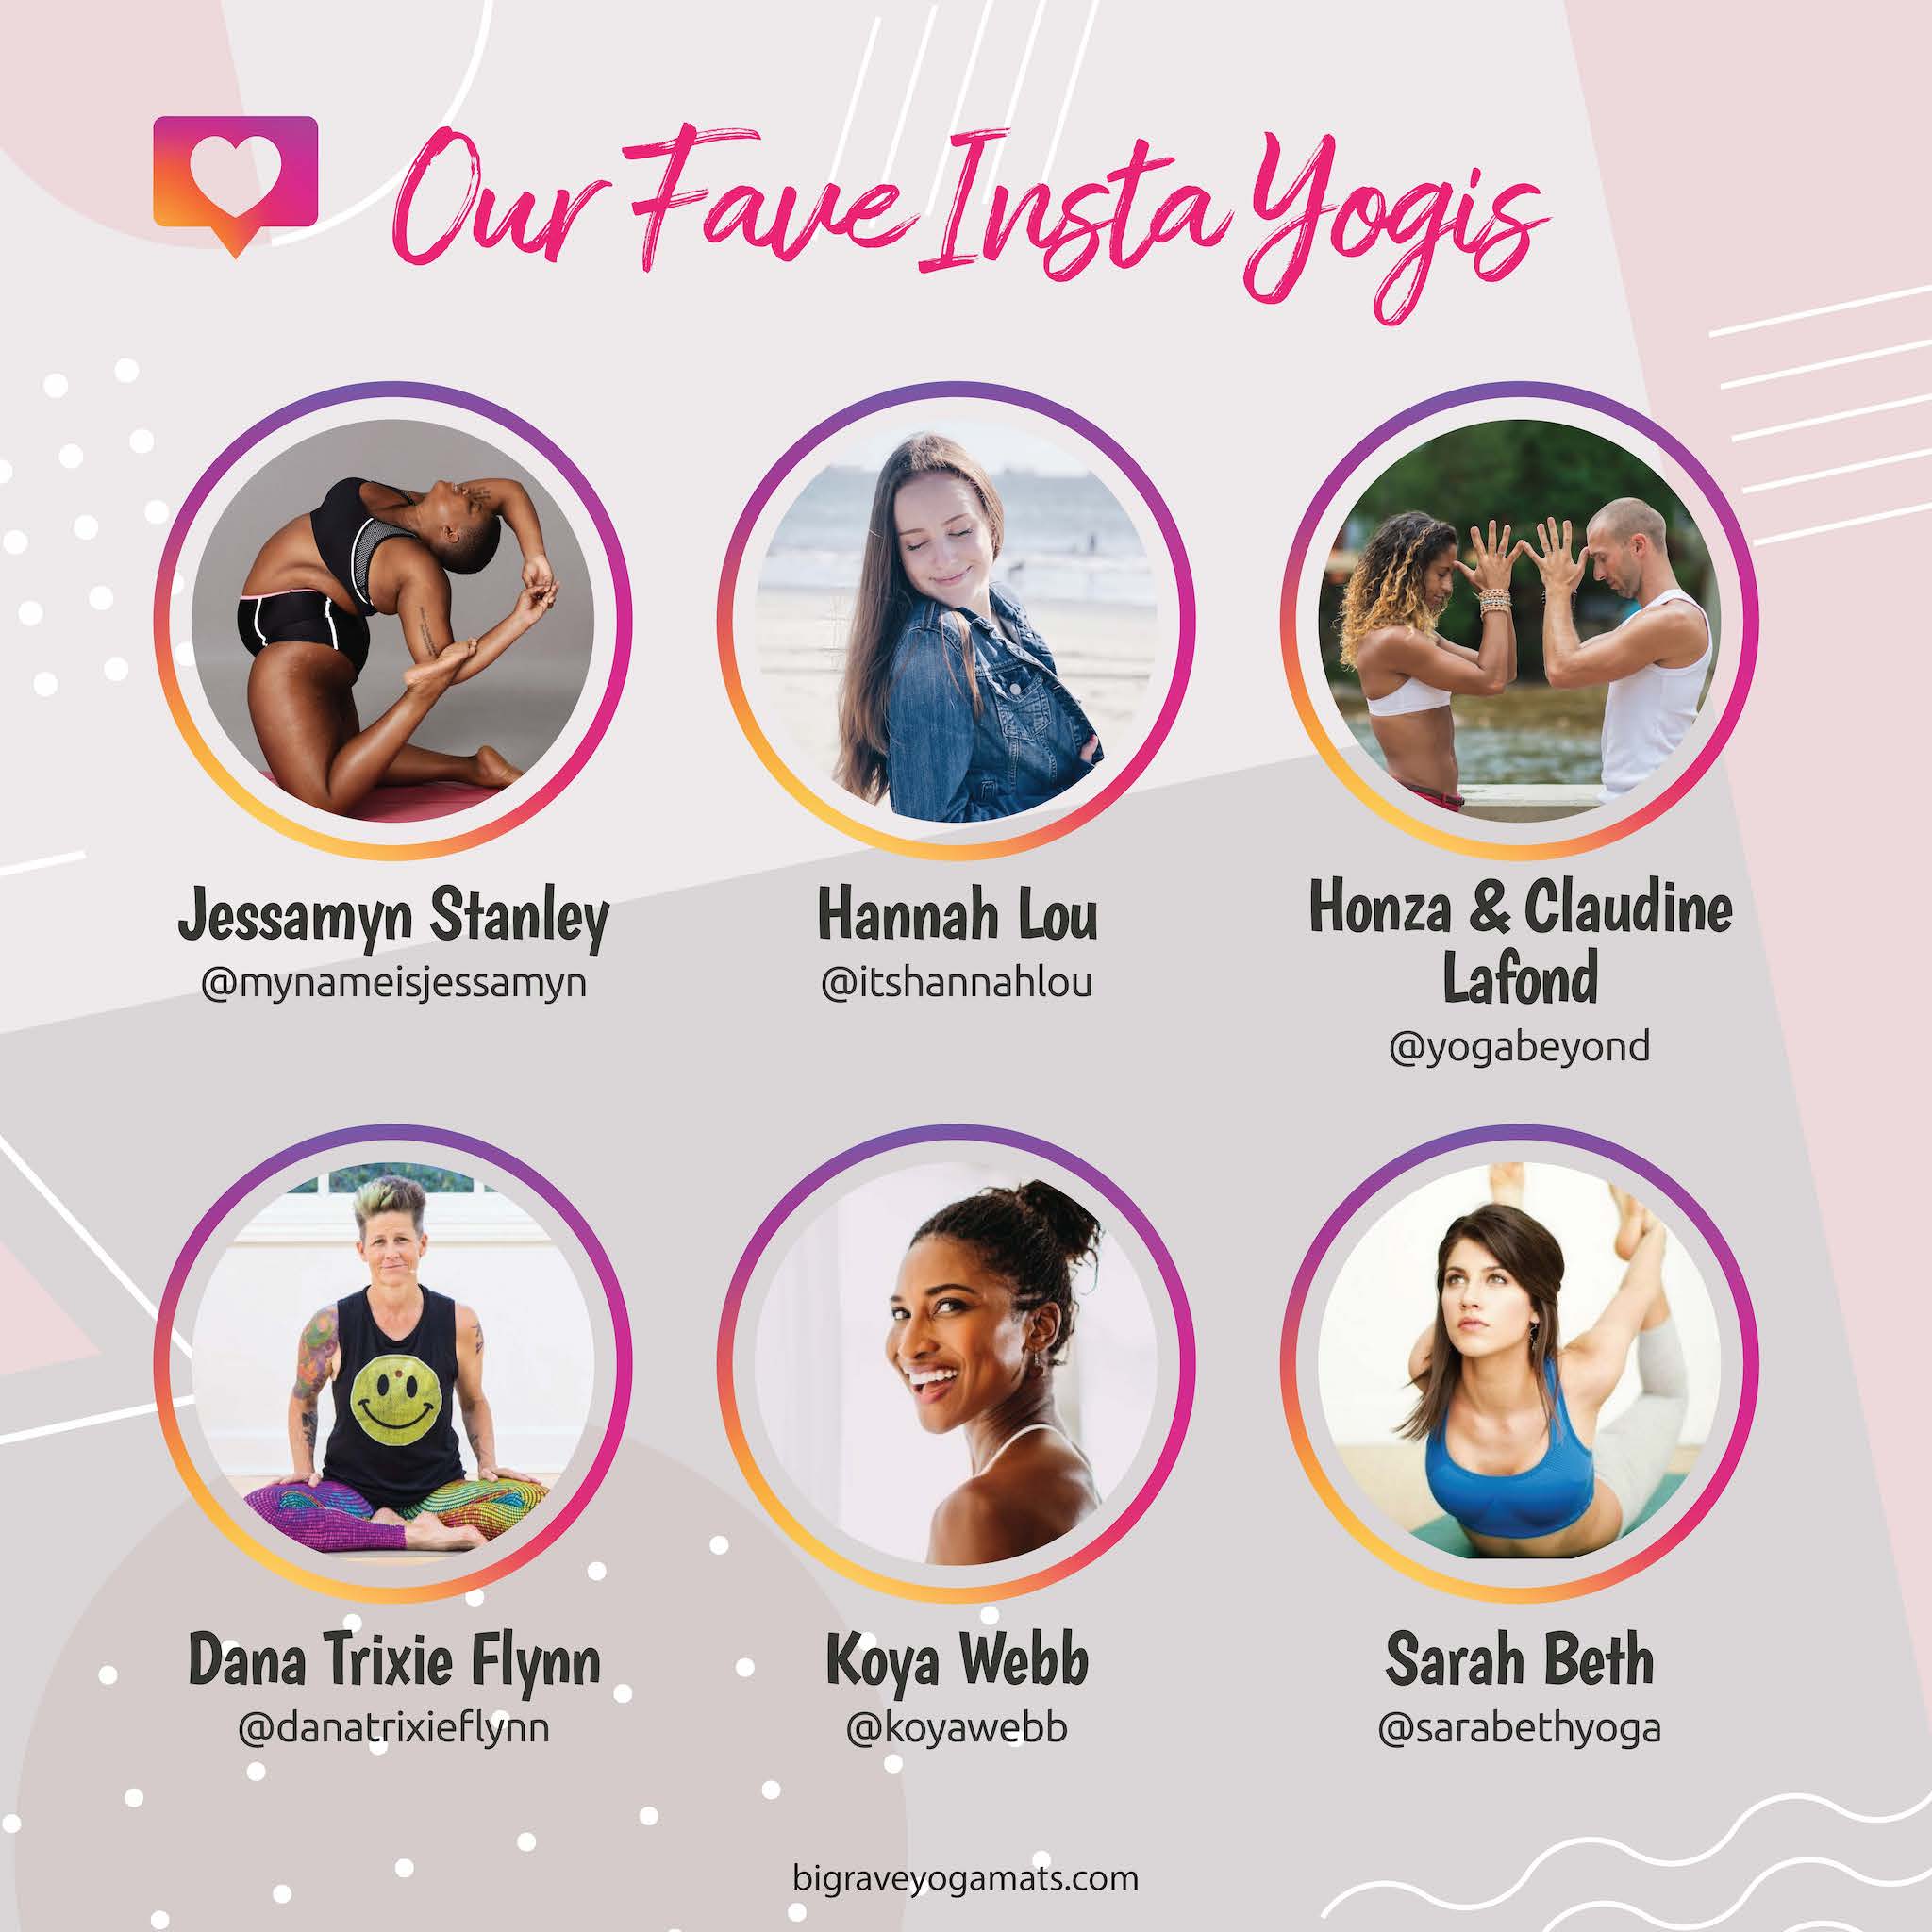 Infographic: Images of the yogis listed below